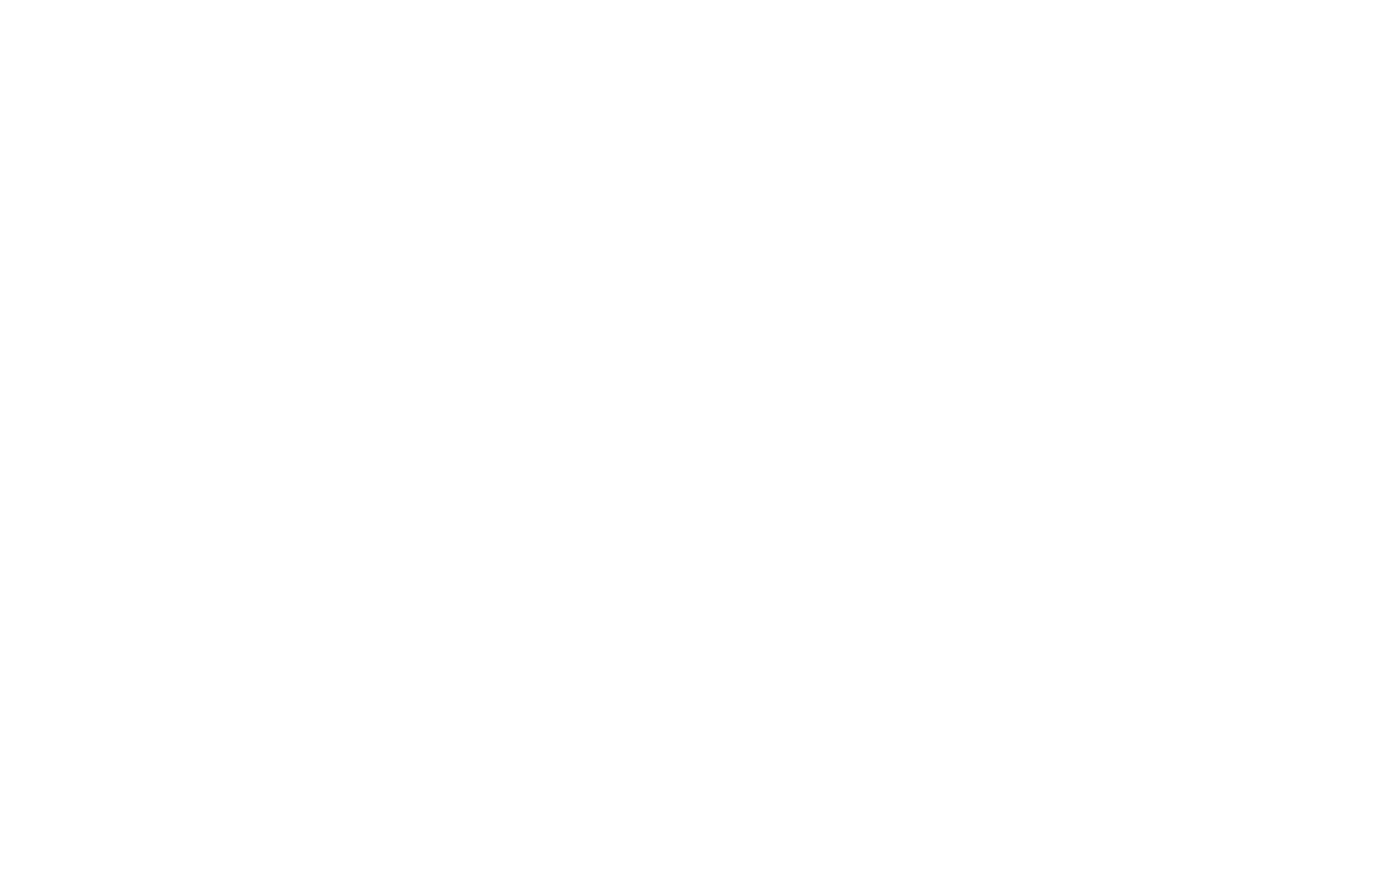 The Sheppard Firm, PLLC